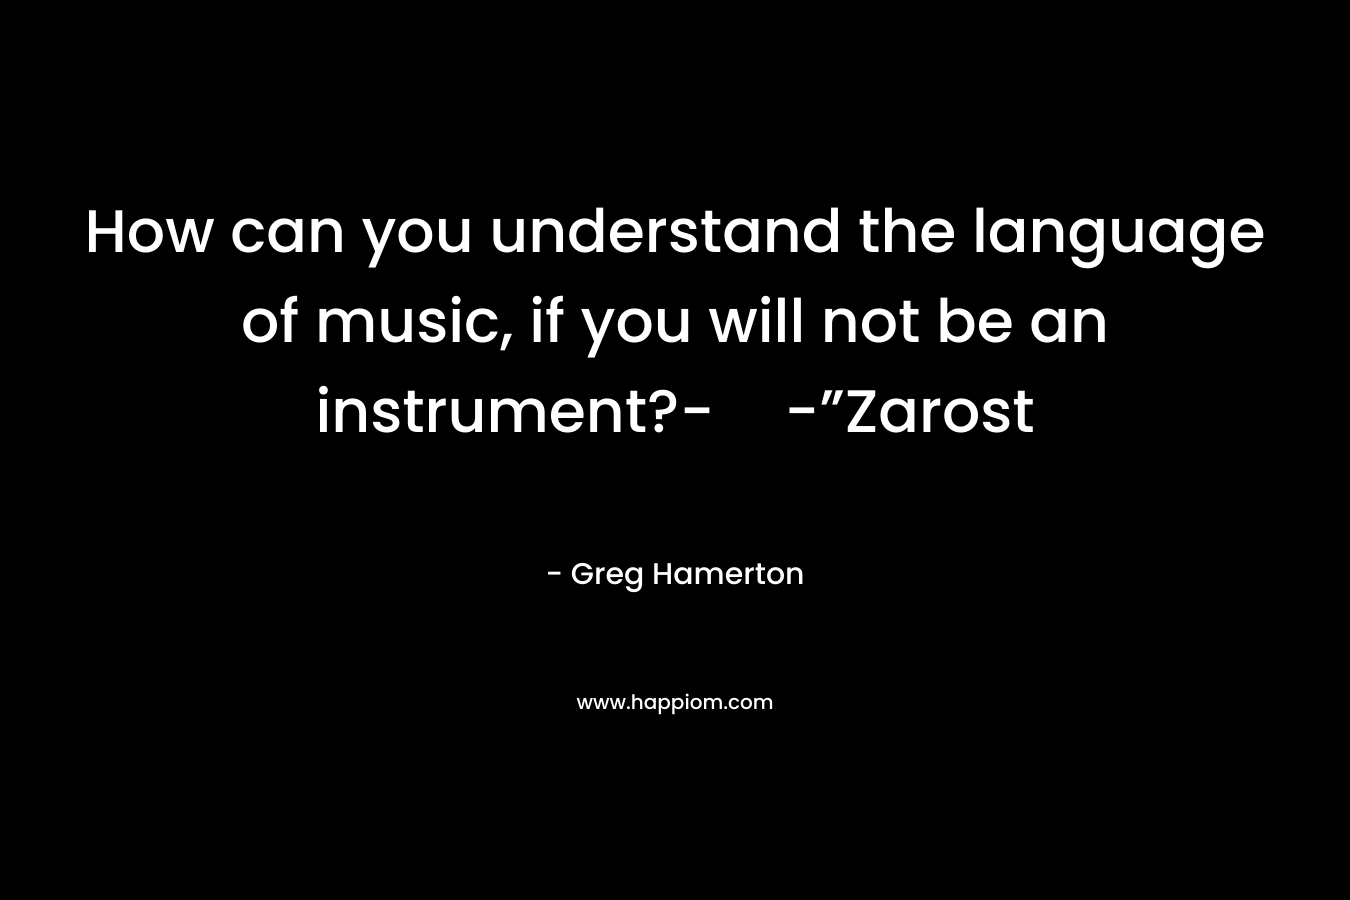 How can you understand the language of music, if you will not be an instrument?--”Zarost